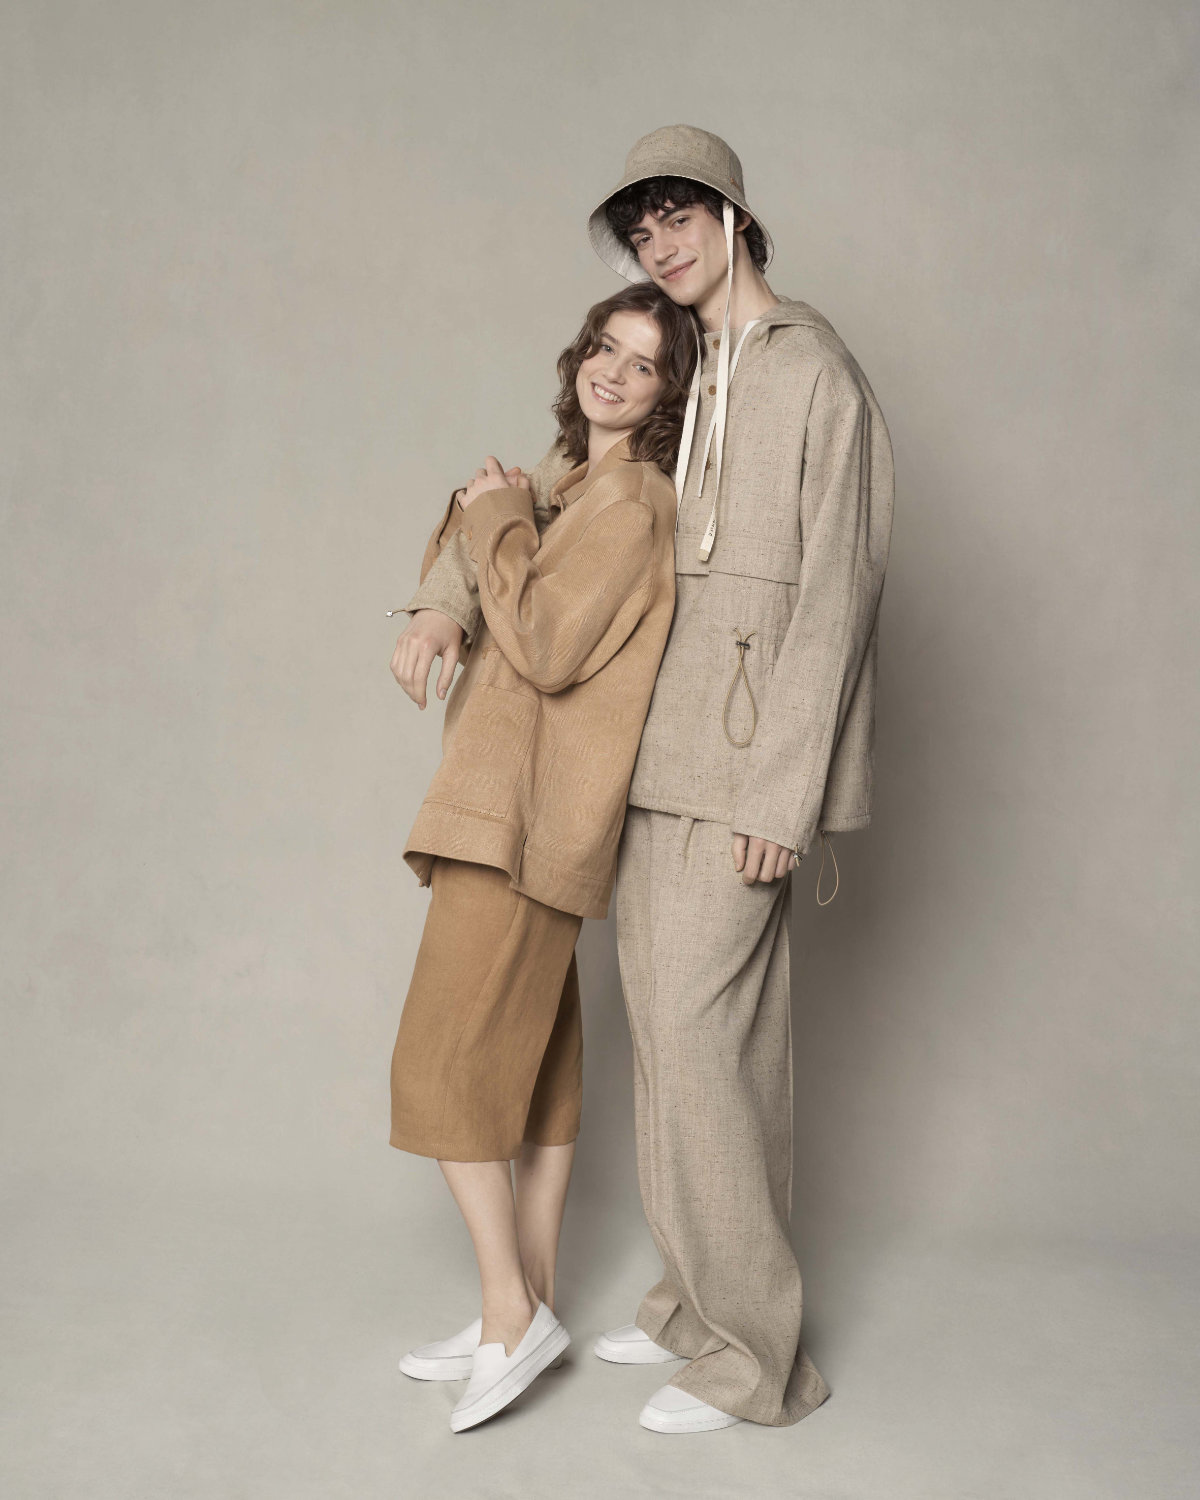 ICICLE Presents “Hemp Up!” Capsule For Spring-Summer 2022